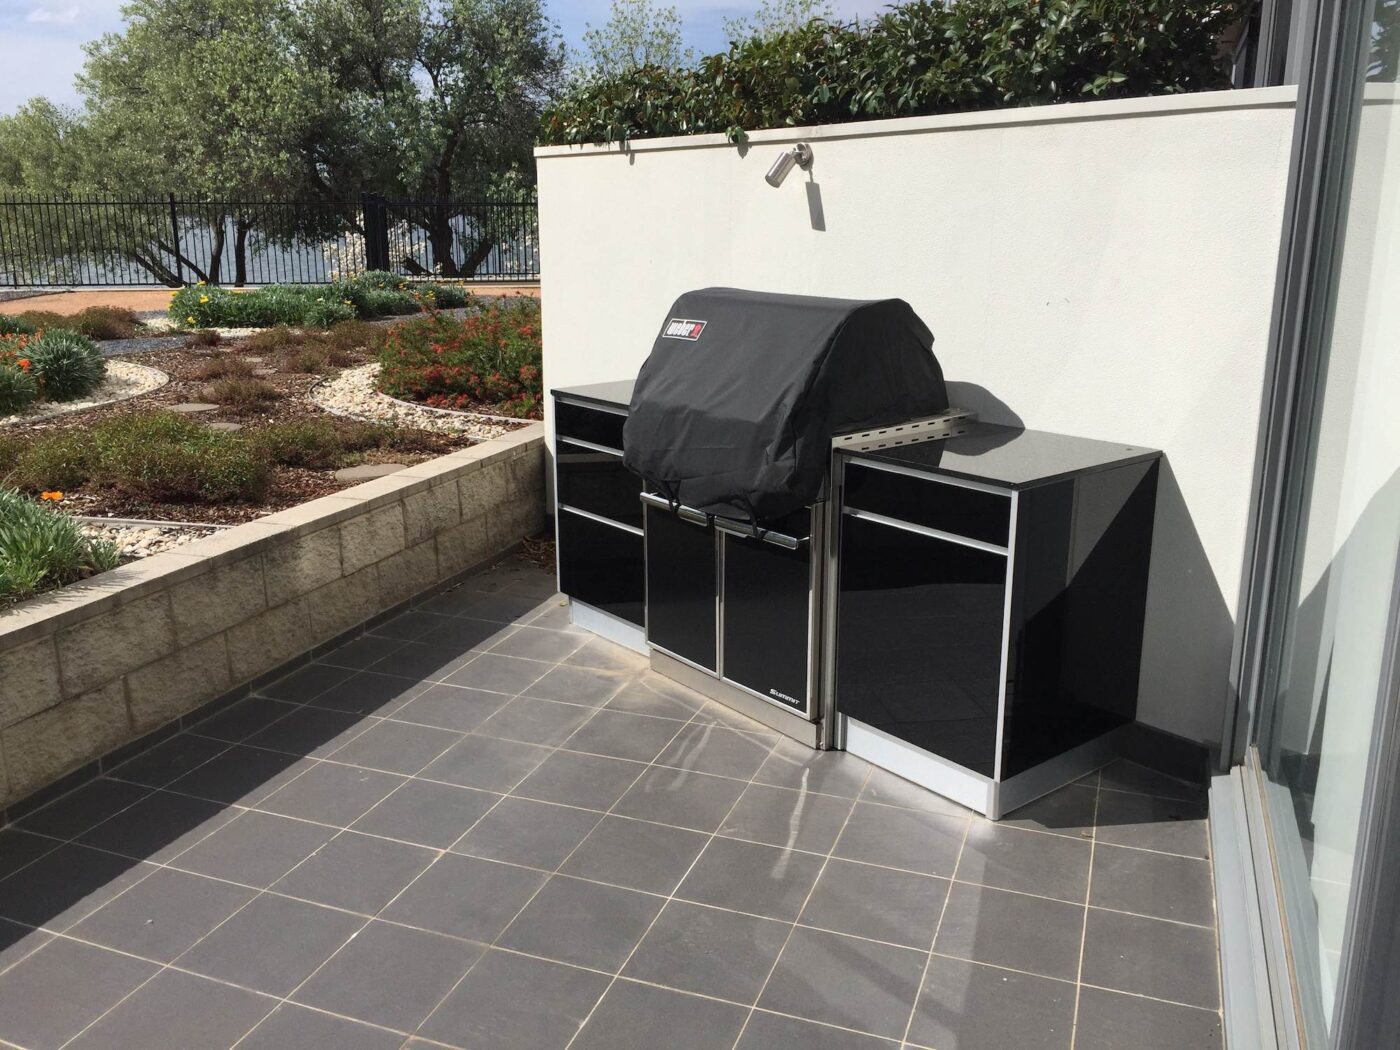 Full aluminium cabinets with 18mm black galaxy granite tops and 5mm tempered glass black doors, customer supplied their Weber Summit BBQ